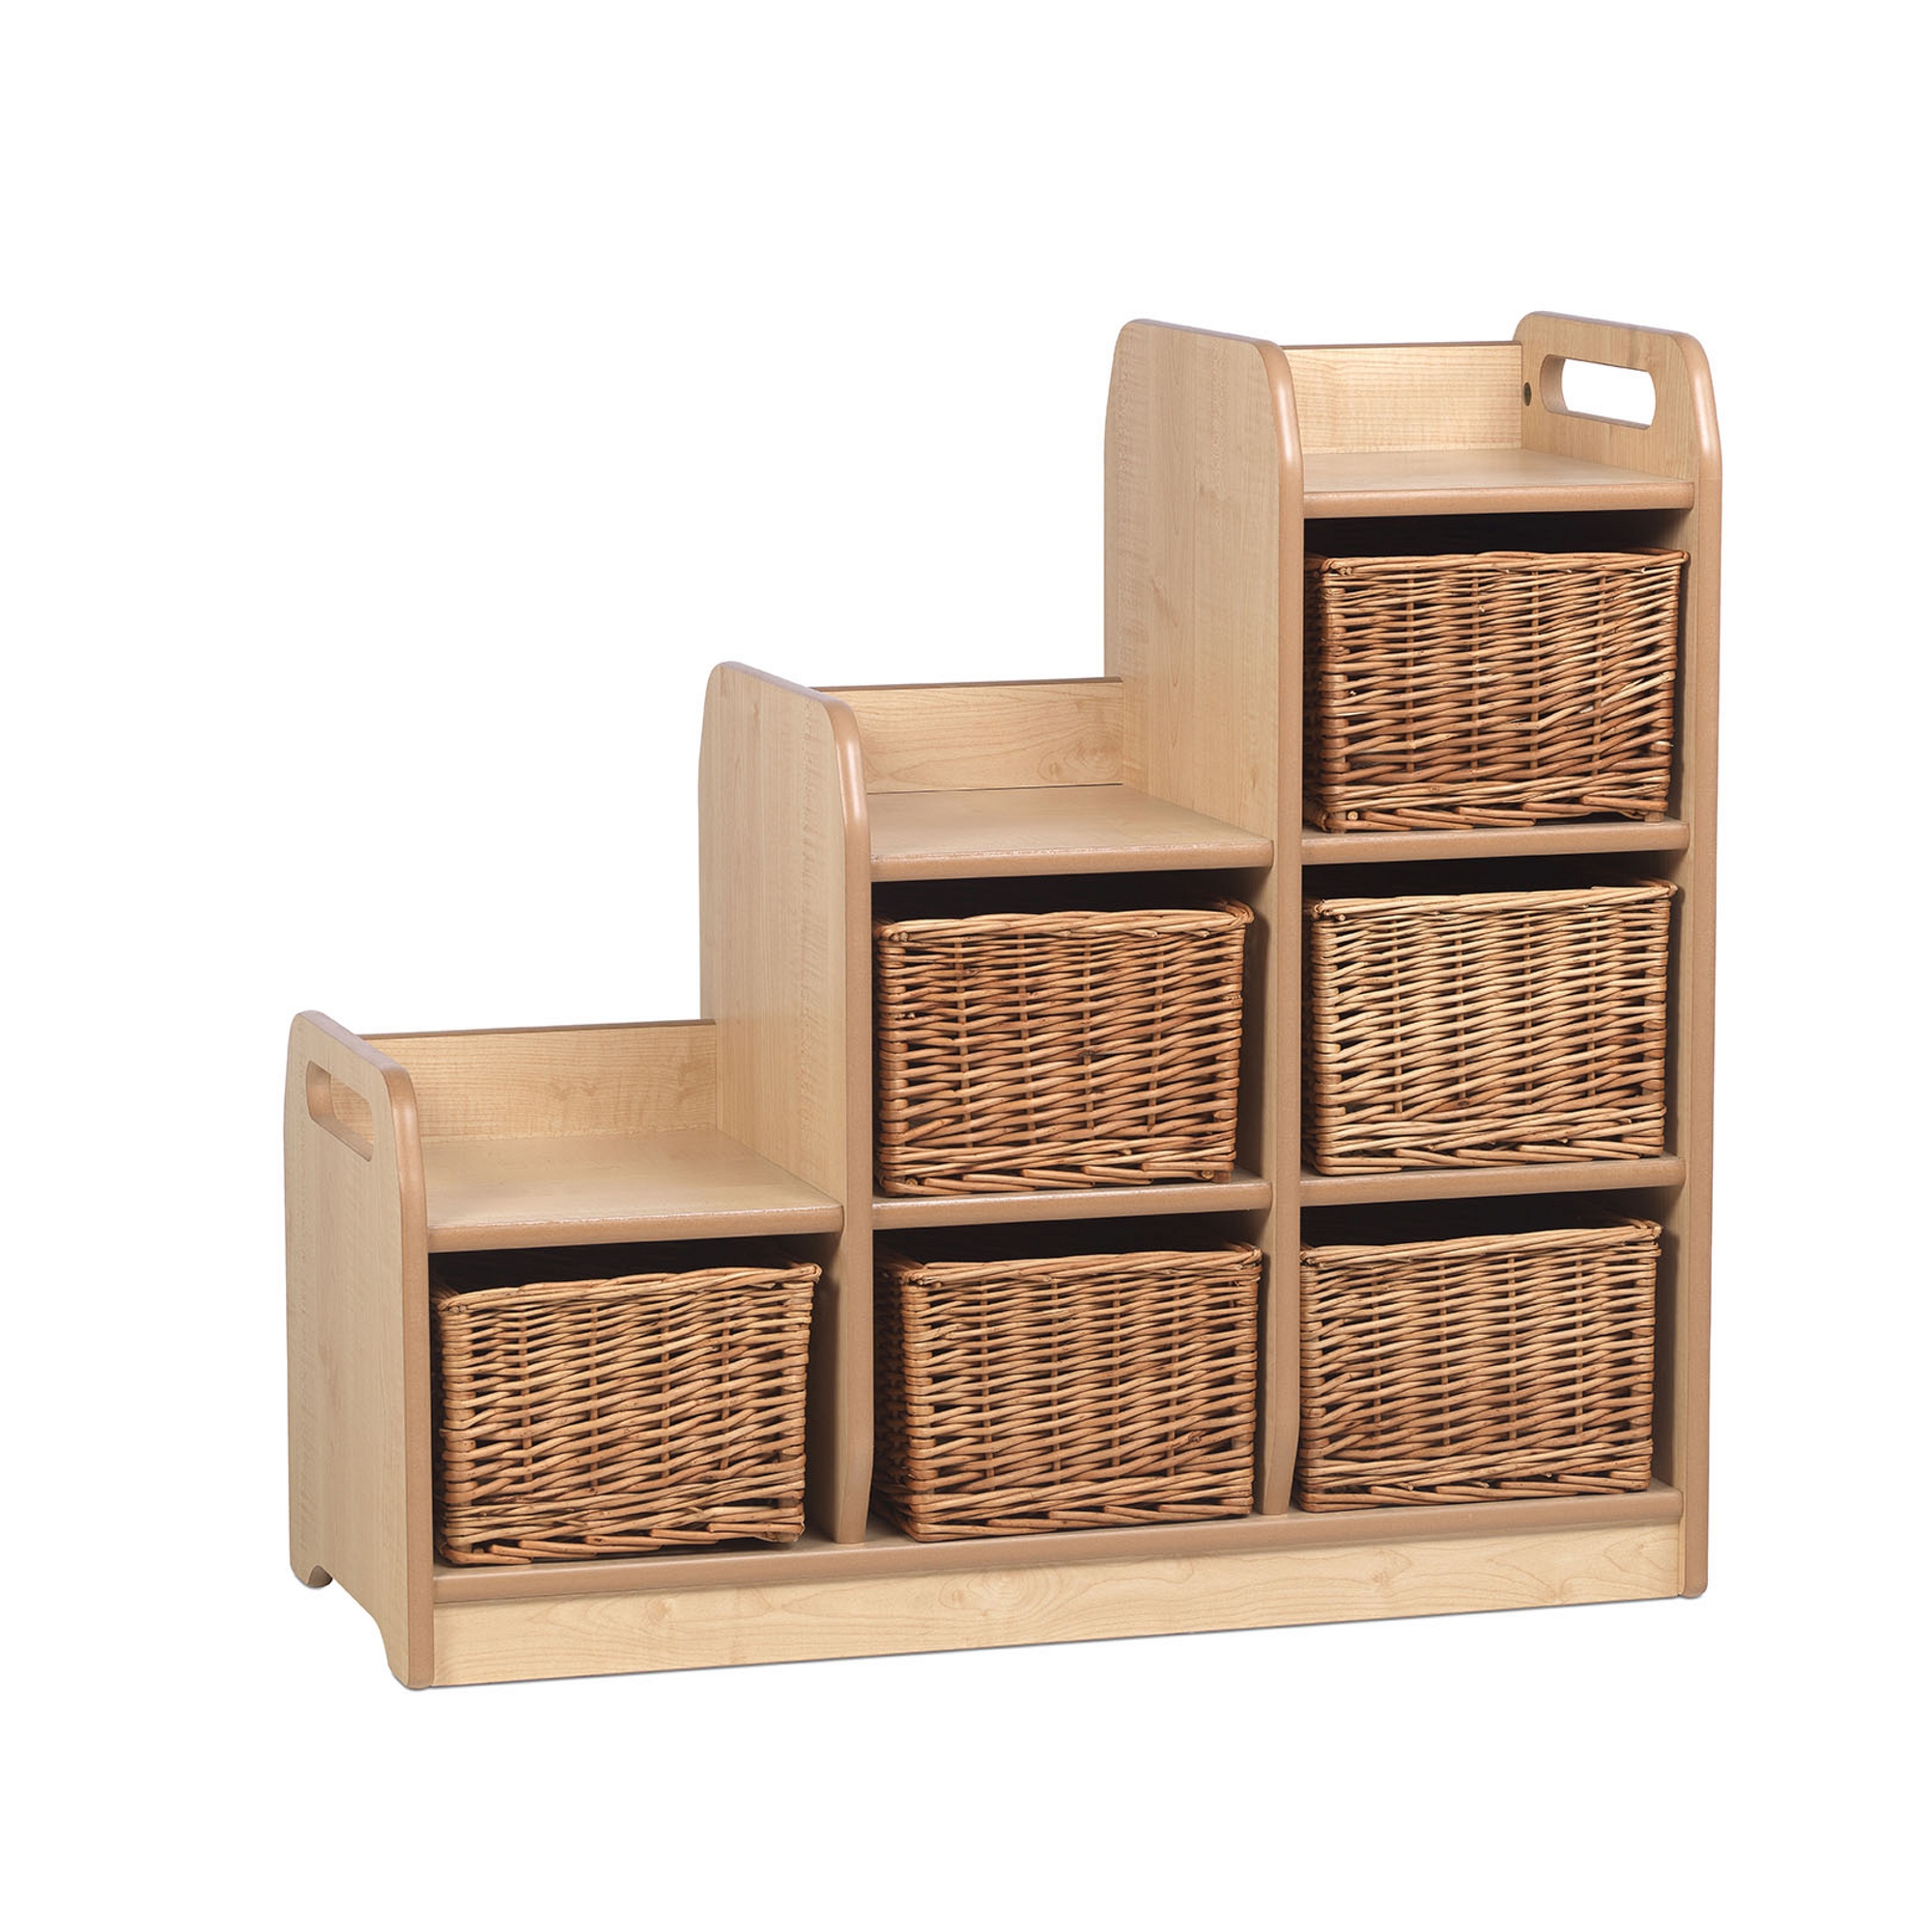 Playscapes Stepped Storage Unit - Right - Wicker Baskets